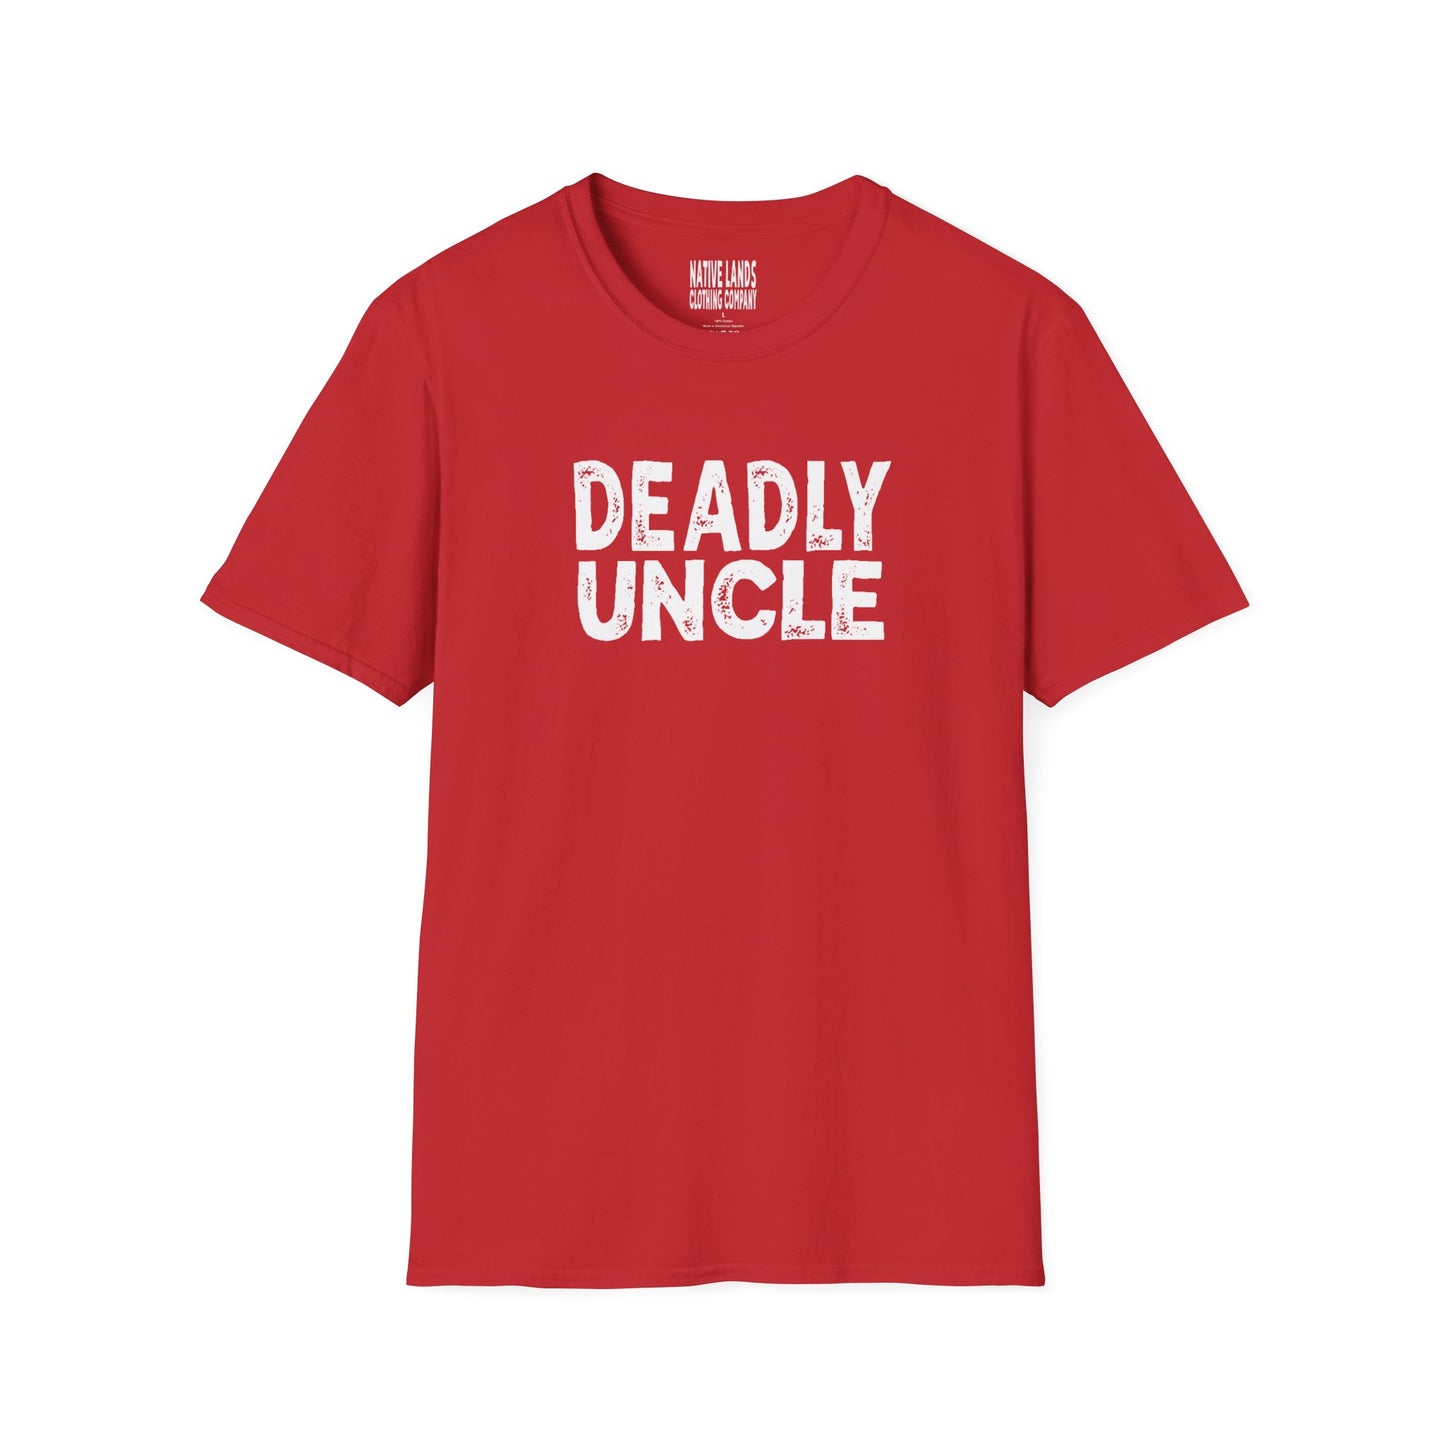 Deadly Uncle Shirt Cotton Native American - Grunge